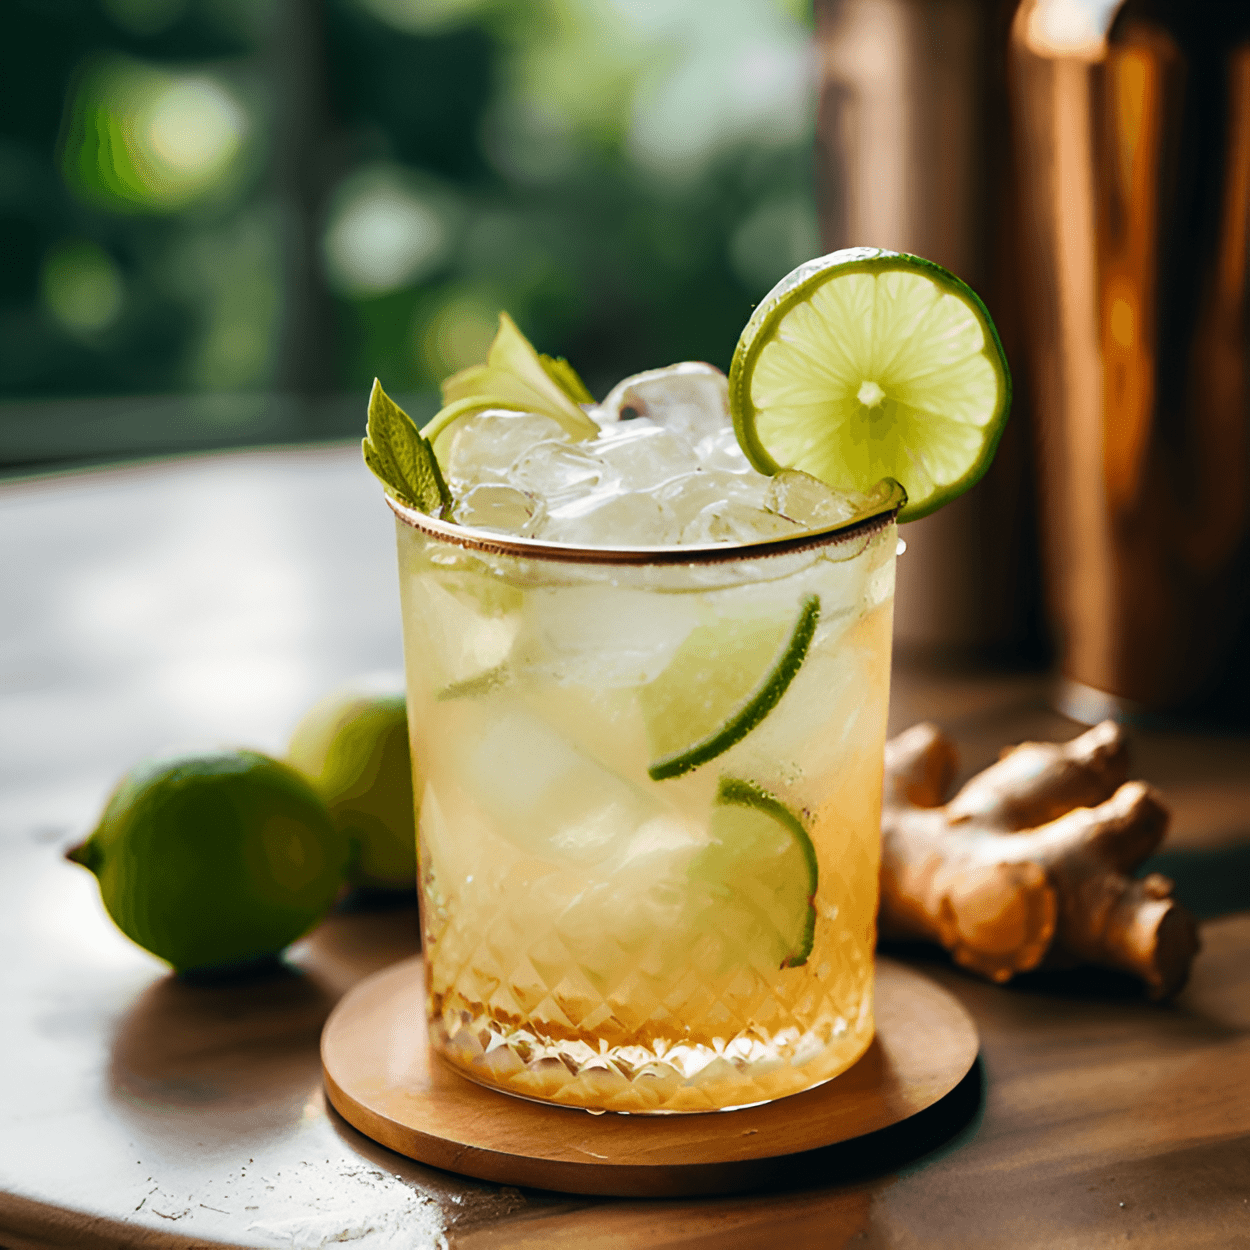 Honey Ginger Mule Cocktail Recipe - The Honey Ginger Mule is a harmonious blend of sweet, spicy, and tangy flavors. The honey provides a soothing sweetness, the ginger gives a spicy kick, and the lime adds a refreshing tanginess. The vodka is subtle, making this cocktail light and easy to drink.